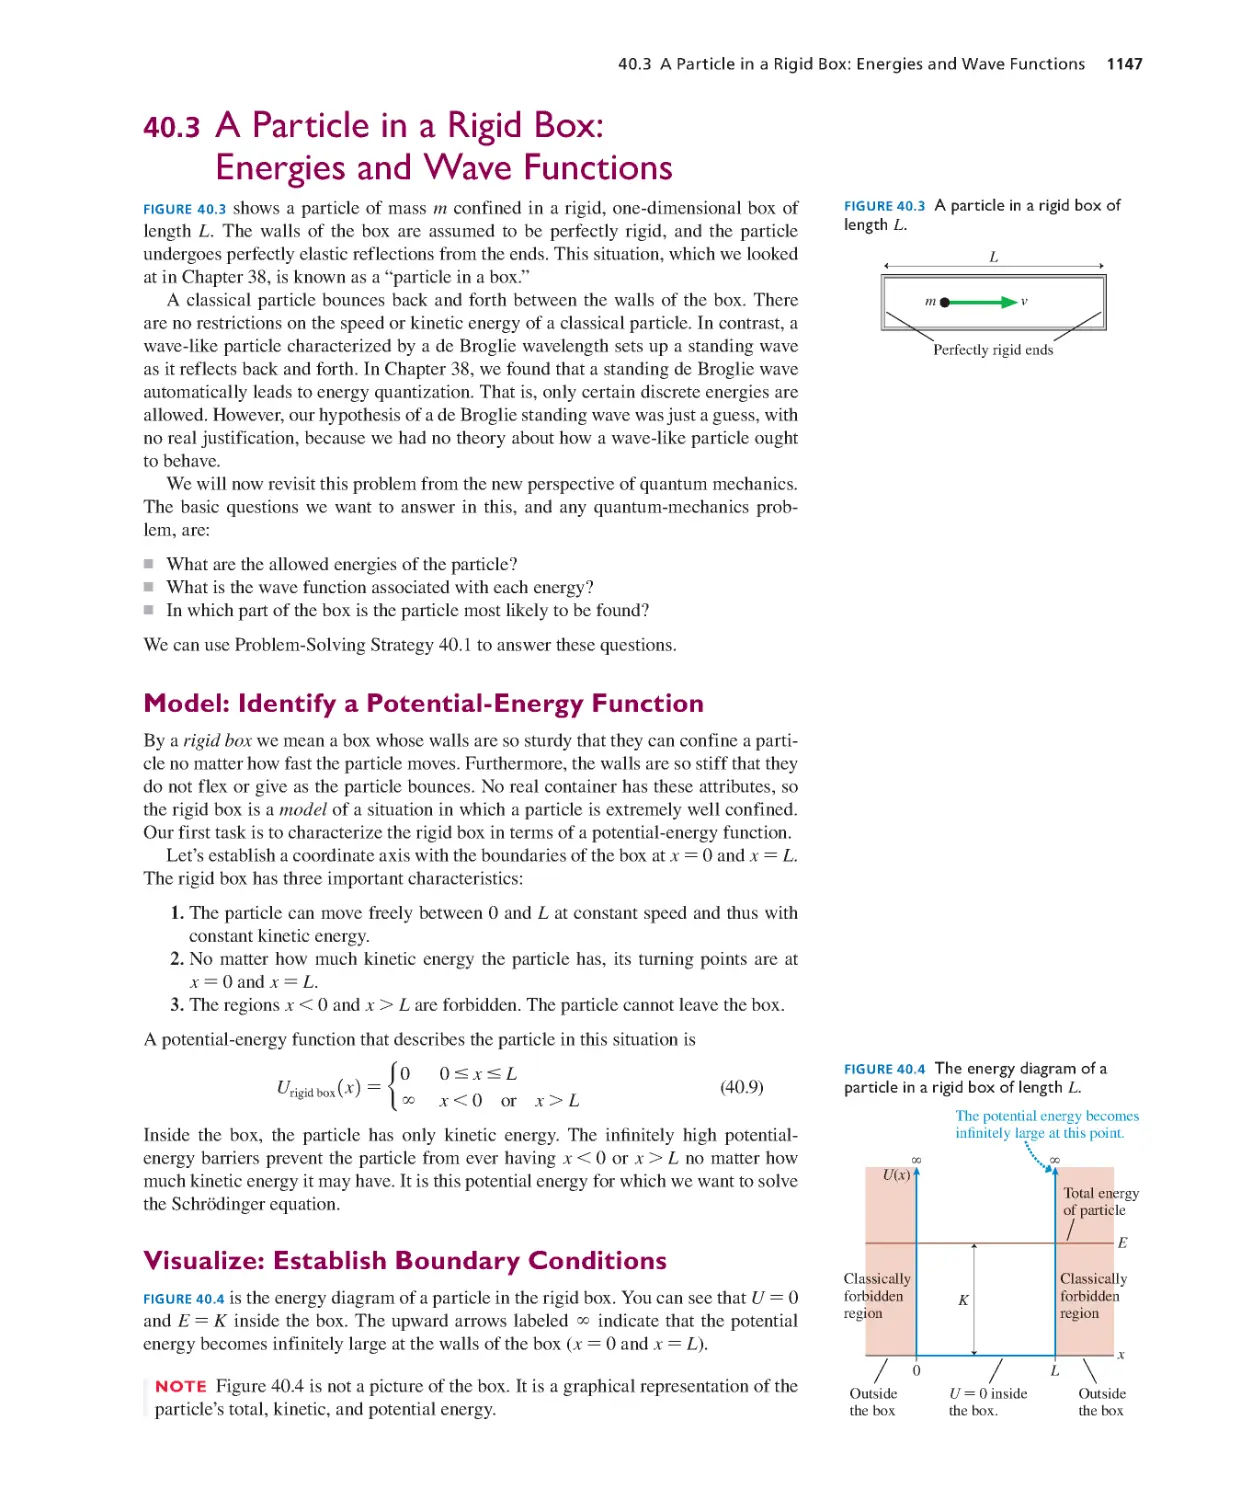 40.3. A Particle in a Rigid Box: Energies and Wave Functions